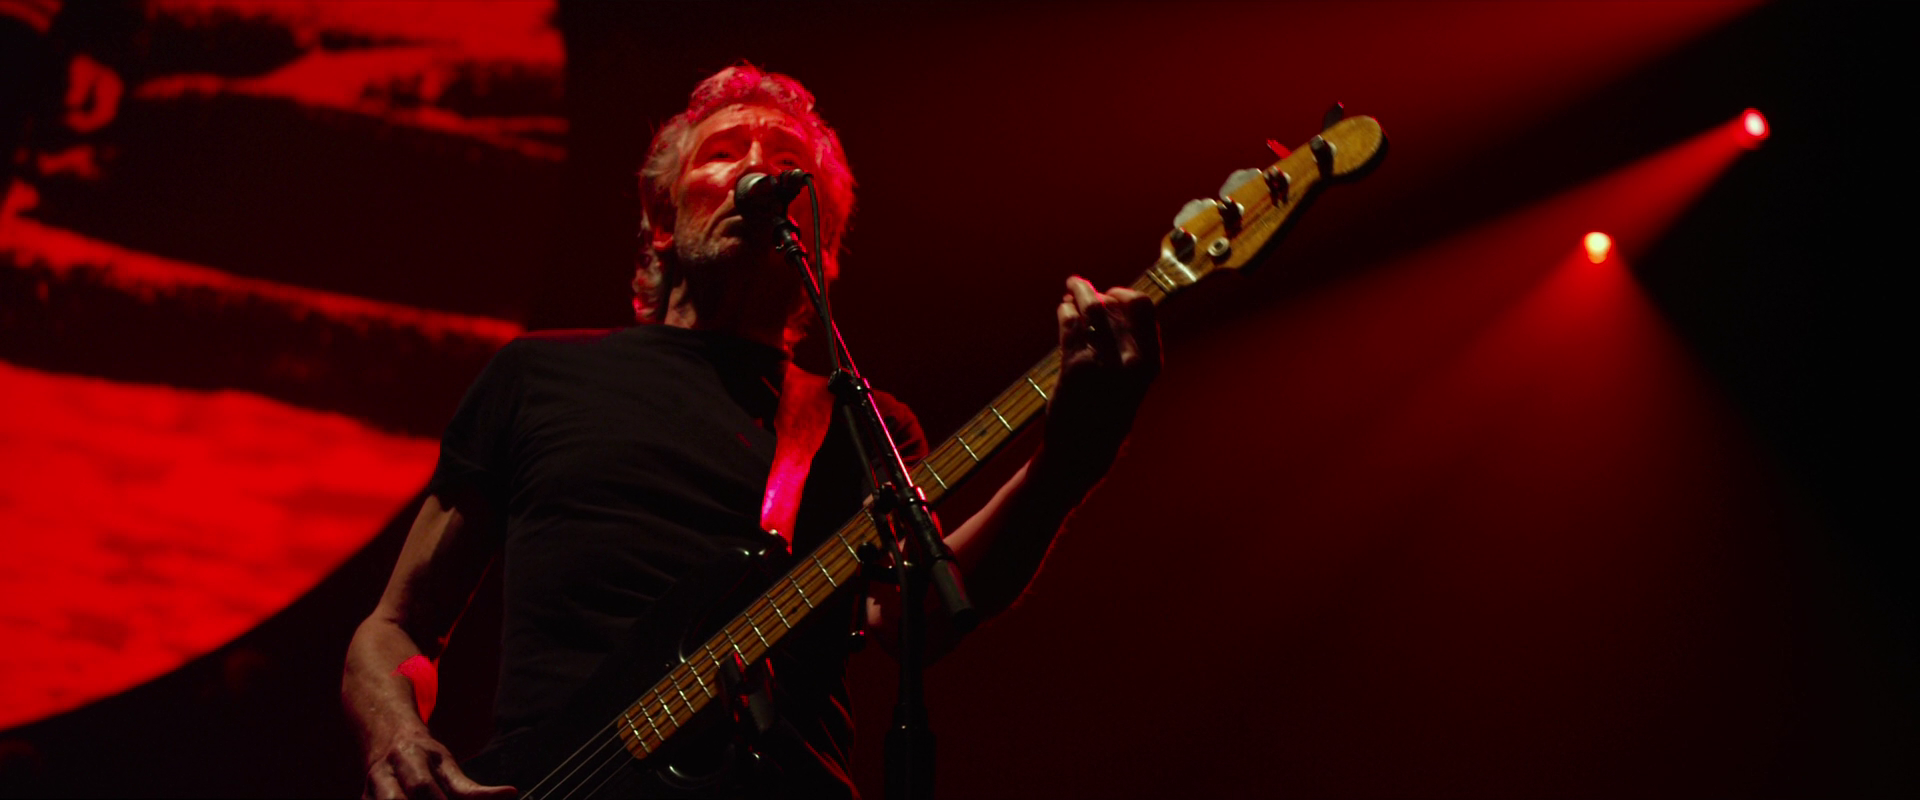 ǽ Roger.Waters.the.Wall.2014.1080p.BluRay.x264.DTS-WiKi 11.12GB-4.png